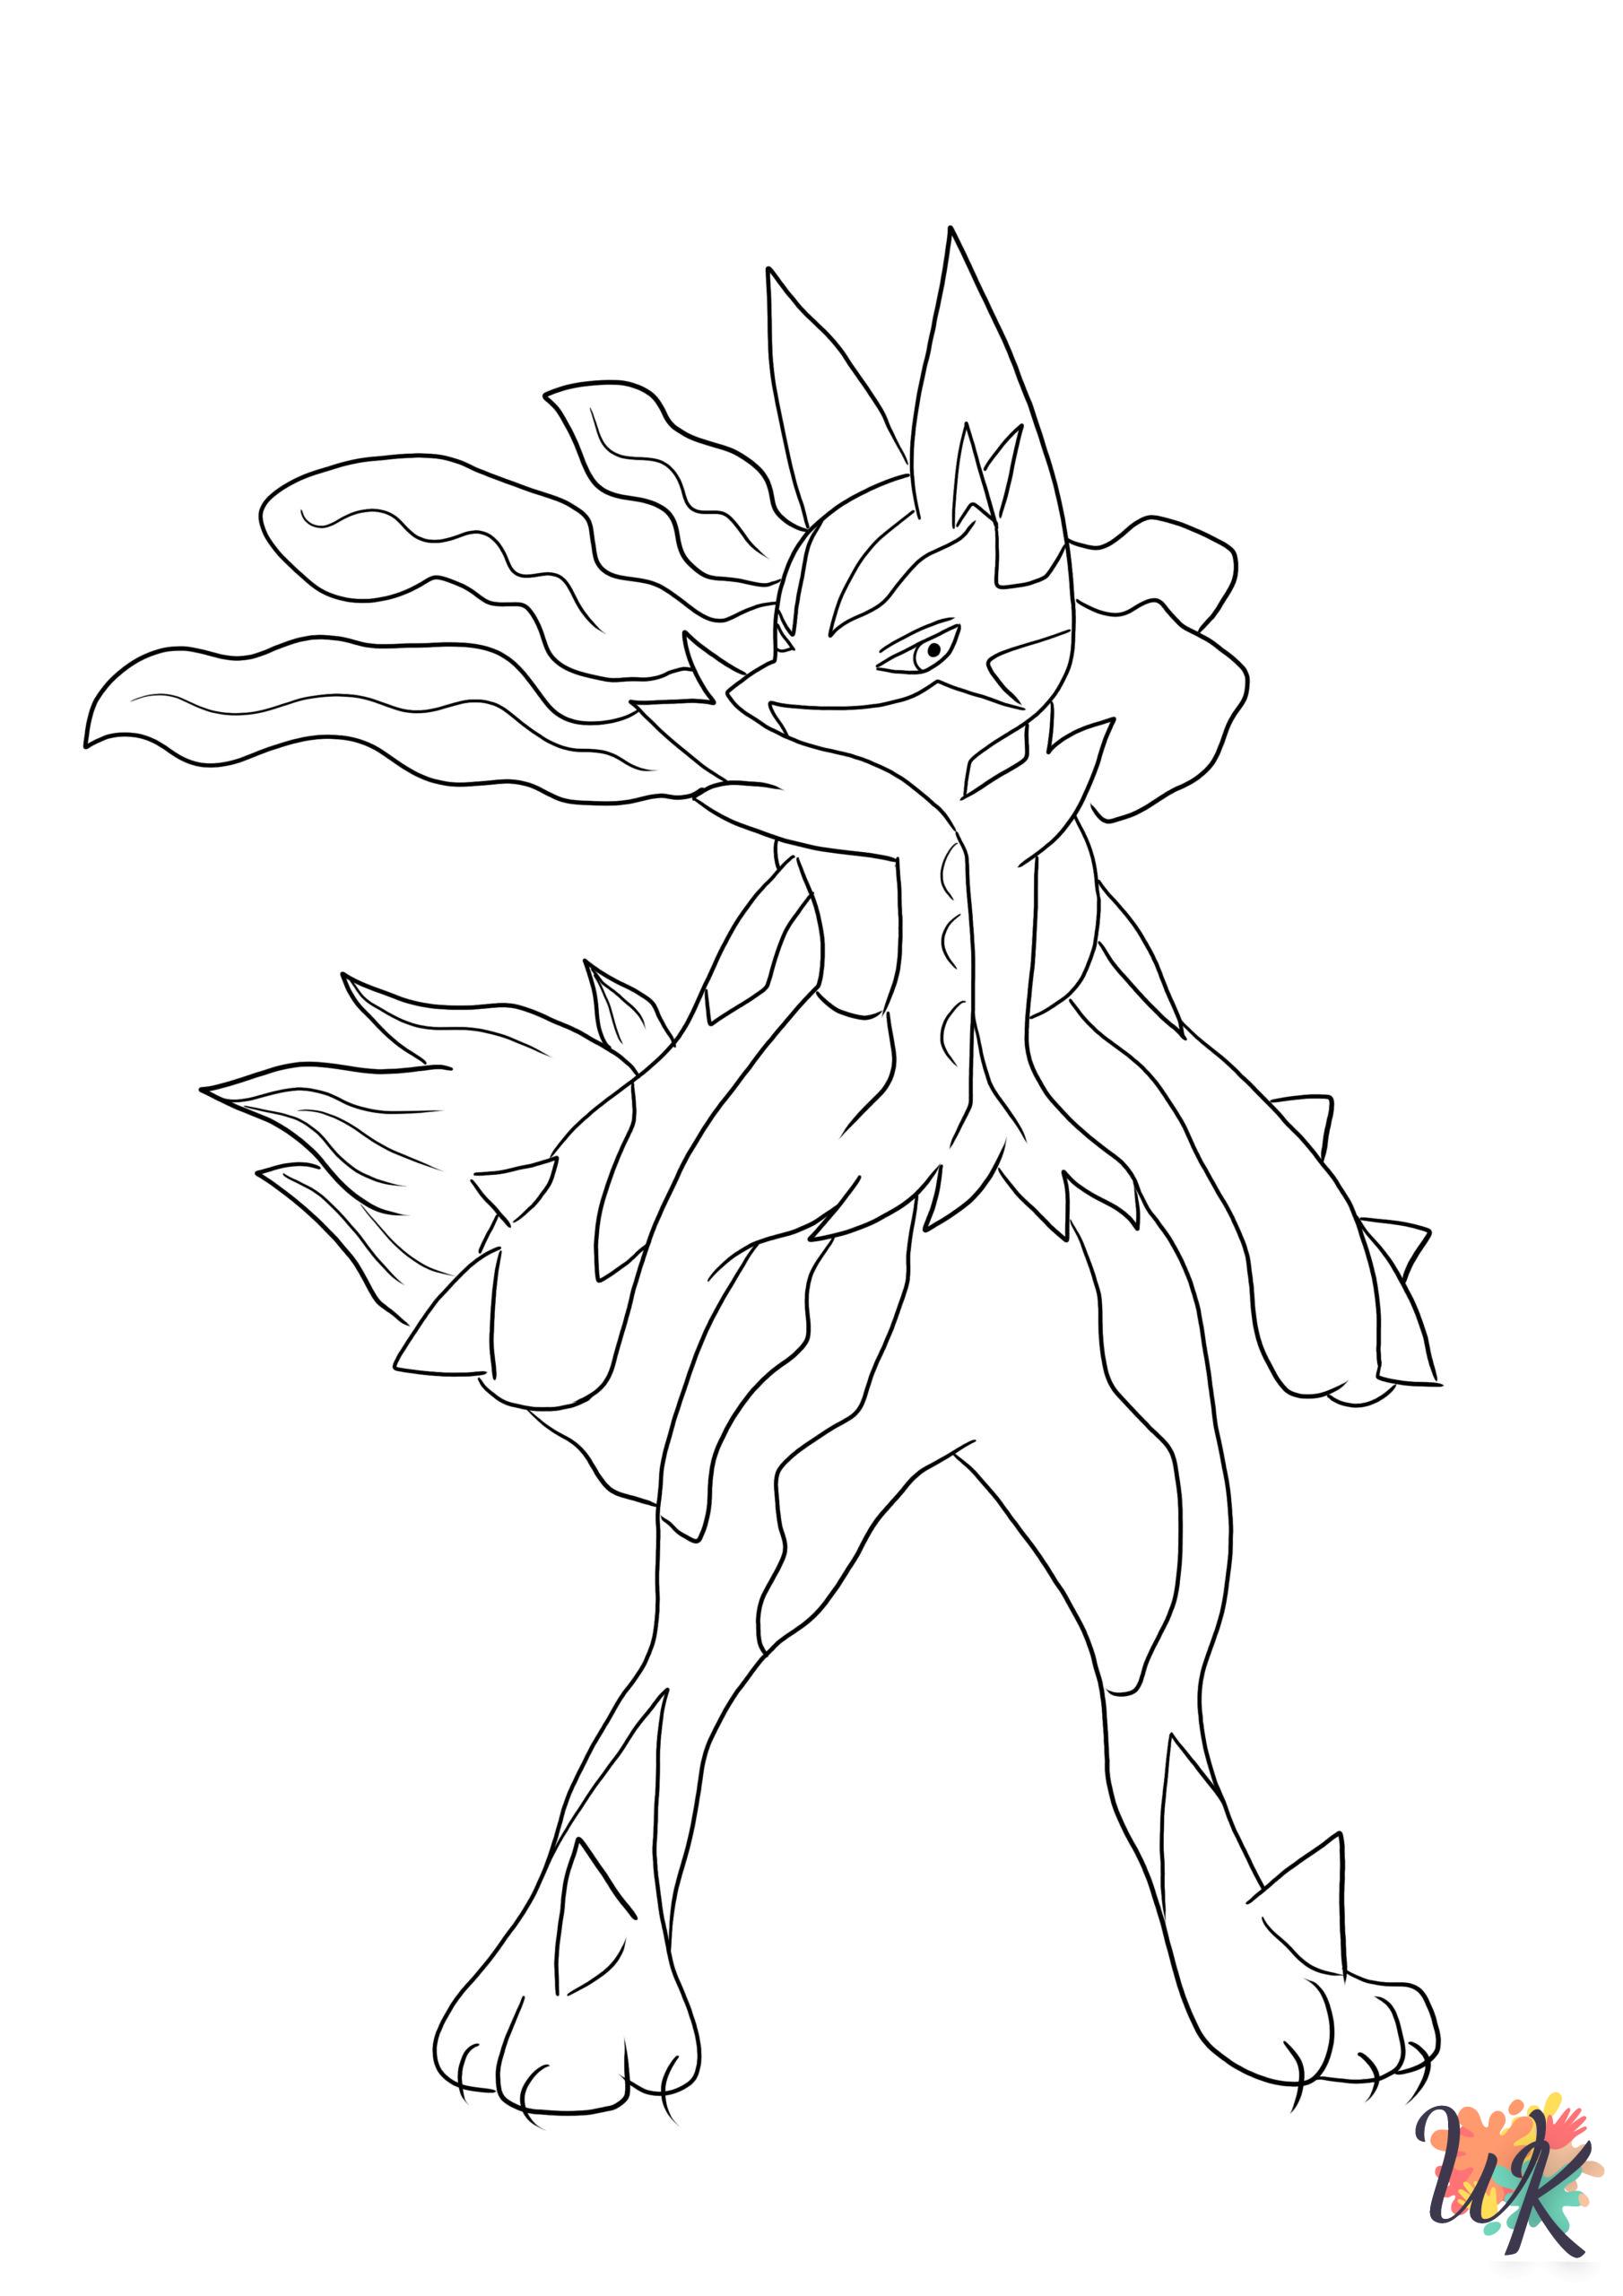 Lucario coloring pages for adults easy